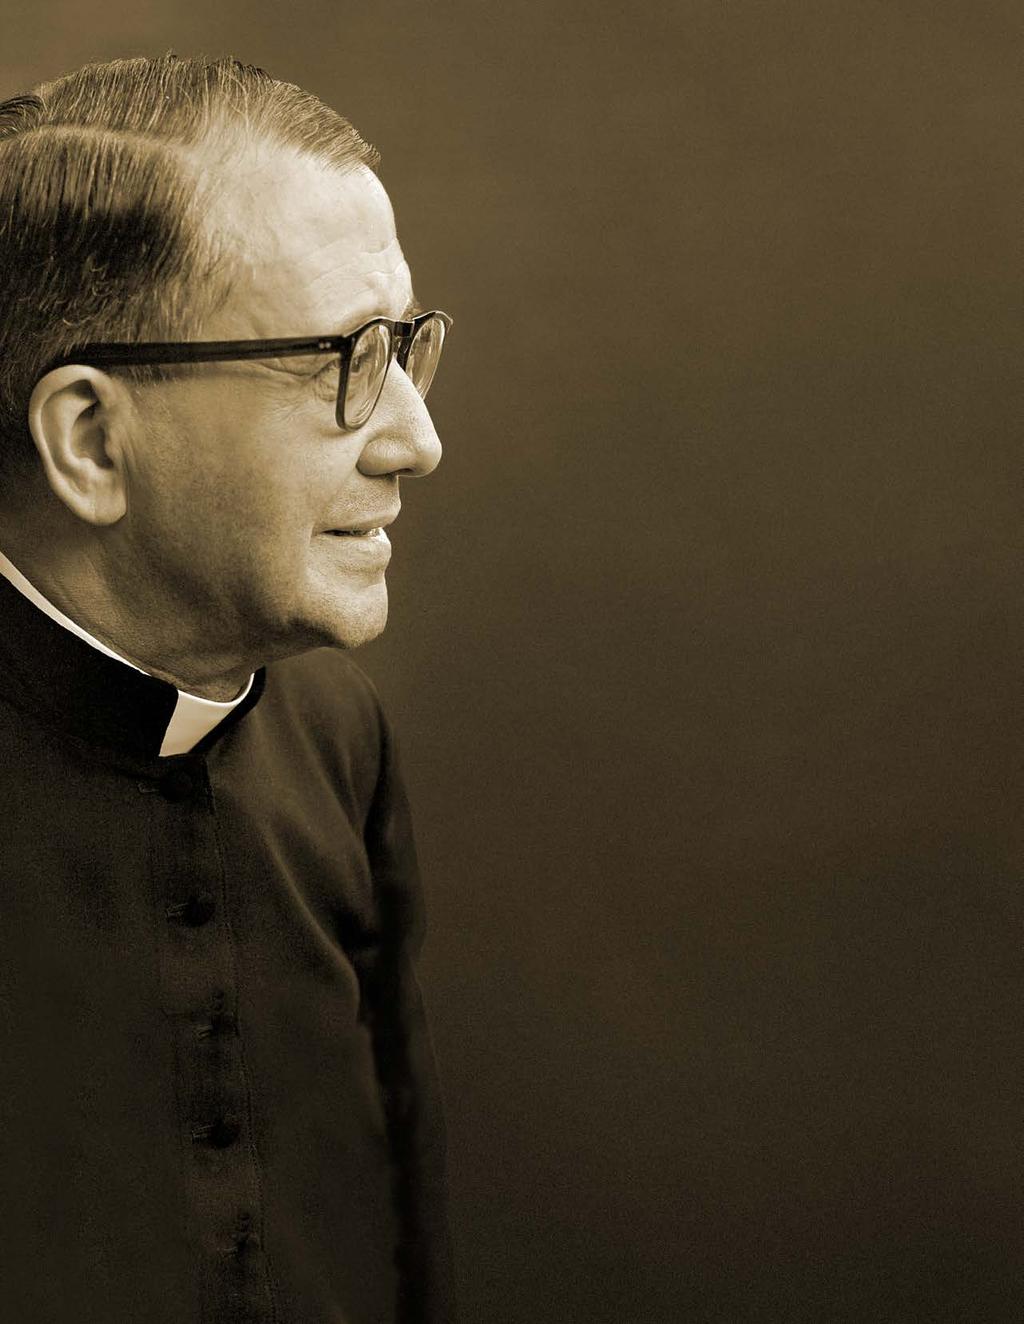 ST. JOSEMARIA INSTITUTE How marvelous it will be when we hear Our Father tell us, Well done, my good and faithful servant, because you have been faithful over a few things, I will set you over many;